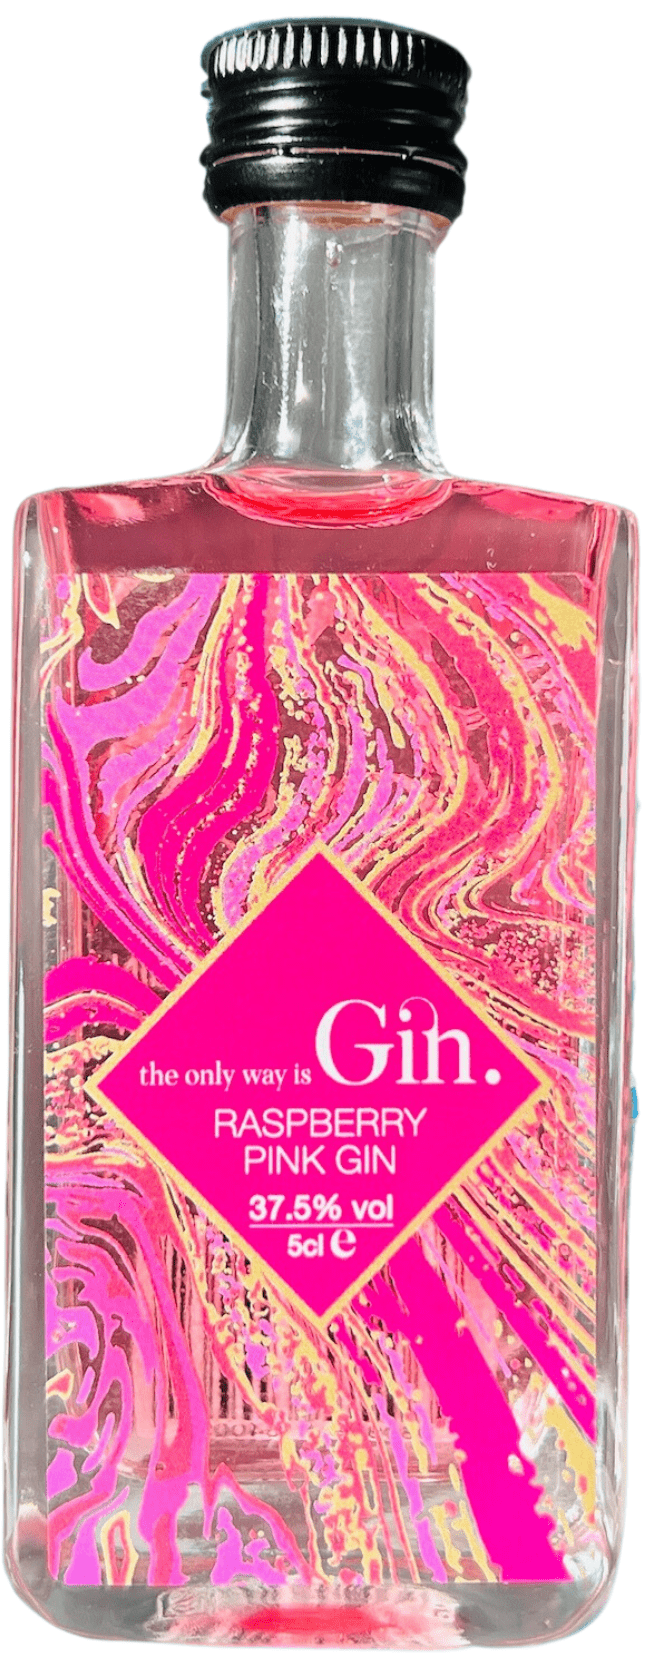 The Only Way Is Spirits Raspberry Pink Gin Miniature 5cl